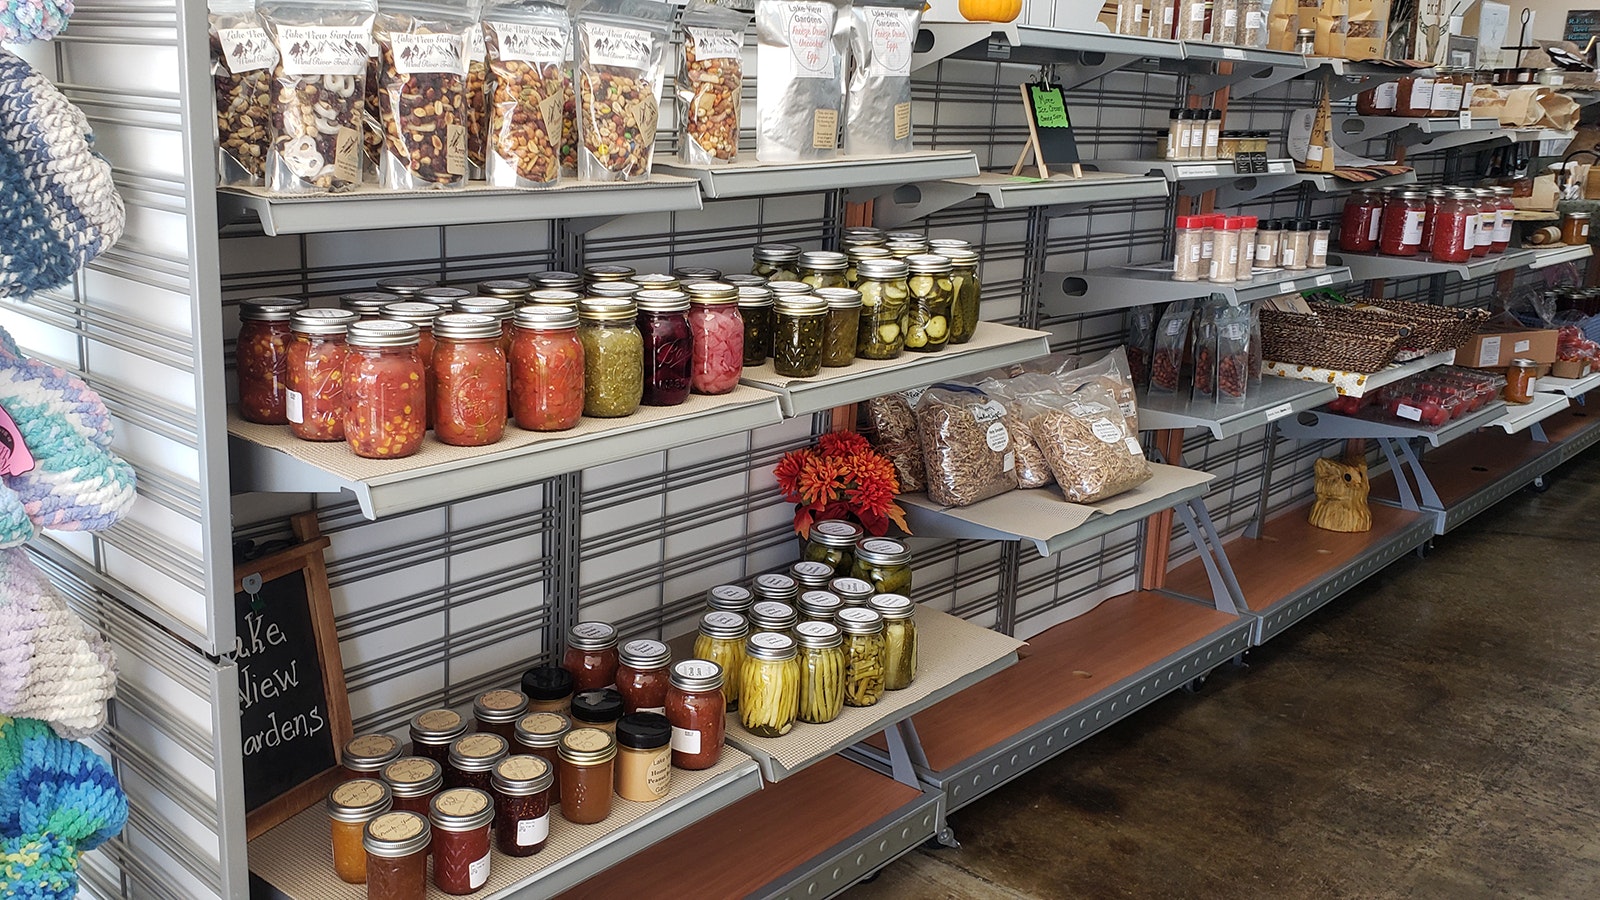 Shelves at the Fremont Local Market contain a wide variety of creative food products and other hand-crafted items.